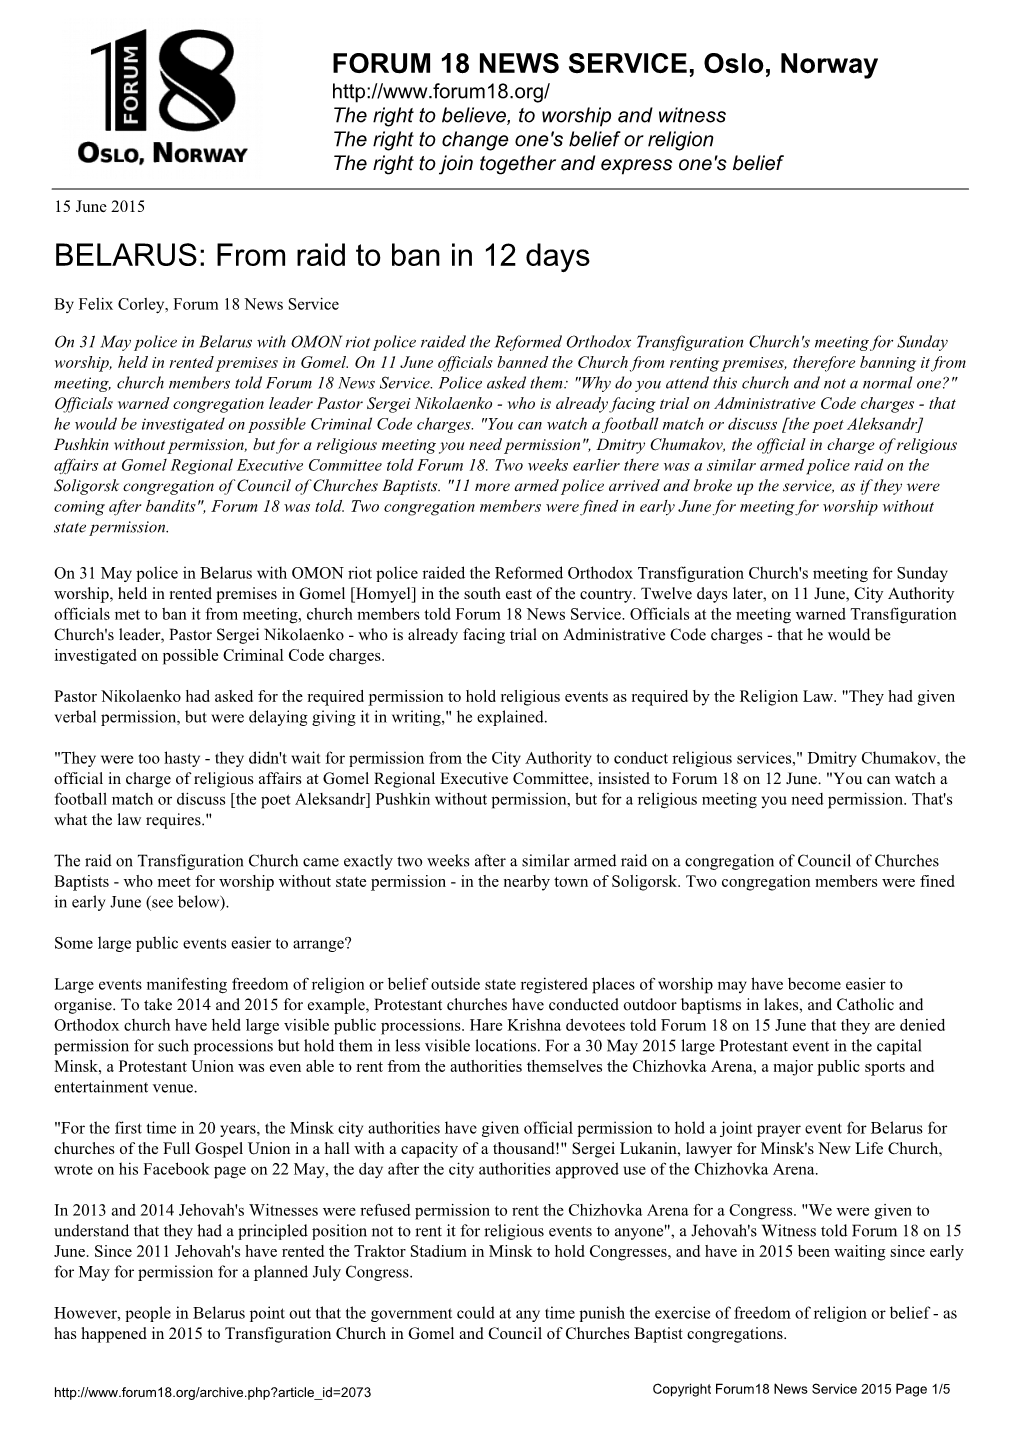 BELARUS: from Raid to Ban in 12 Days